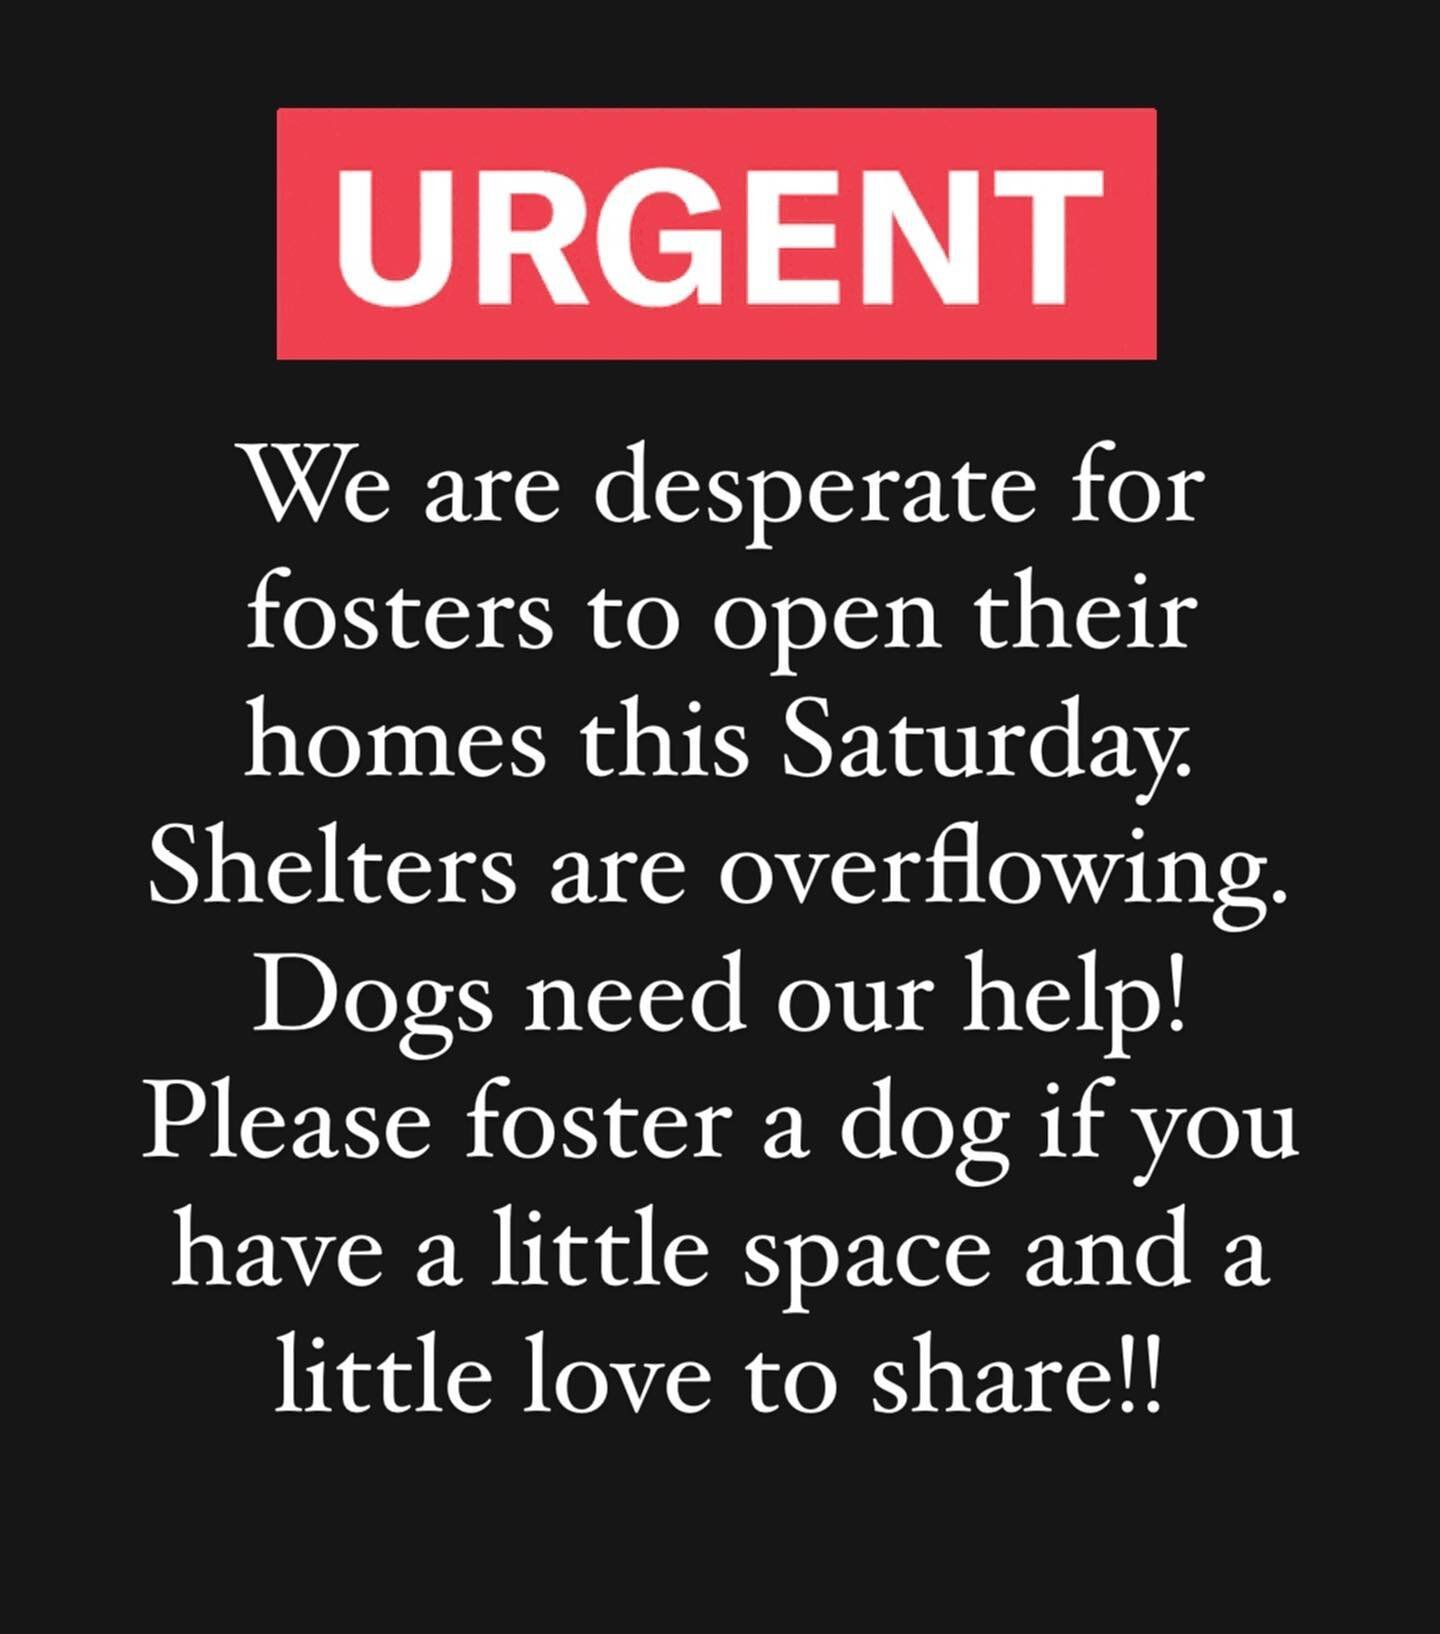 All of the dogs posted are dog friendly and all-people friendly.
Many are fostered with kids in the Southwest. 
Most are already known to be cat friendly.
They&rsquo;re fully vetted and sterilized.
Please DM to help or email fosters.truenorthrescue@g